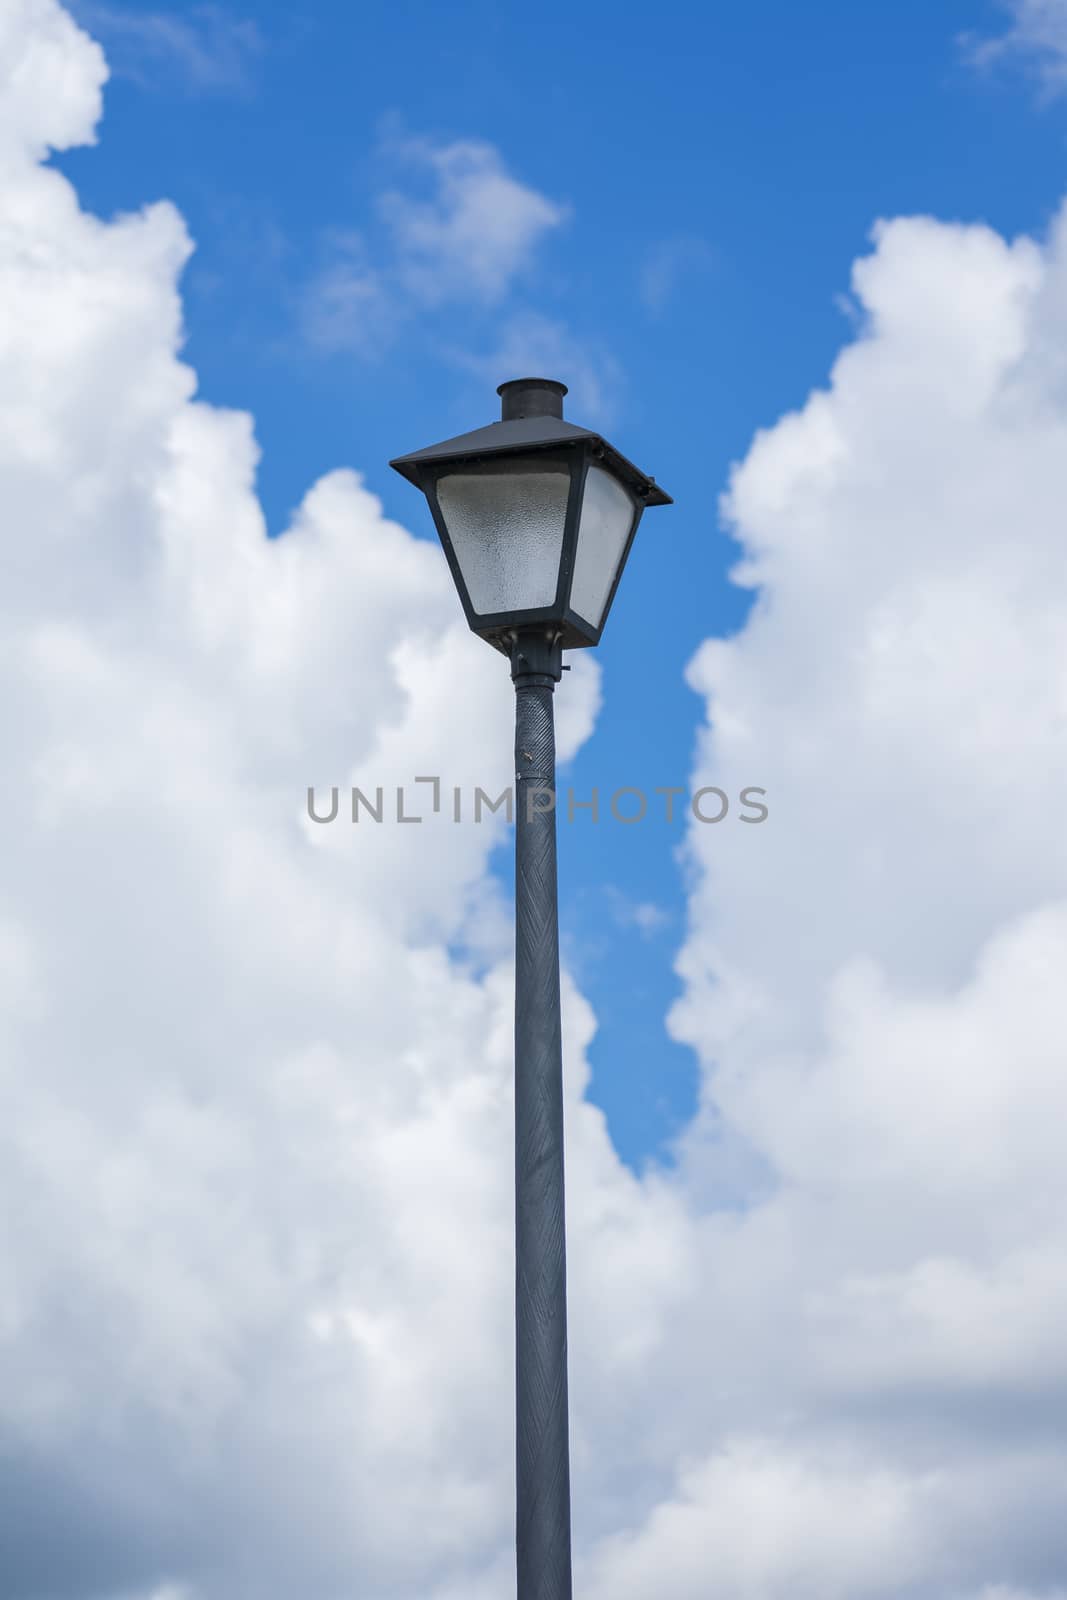 Lamppost Against Cloudy Sky Vertical by stockbuster1